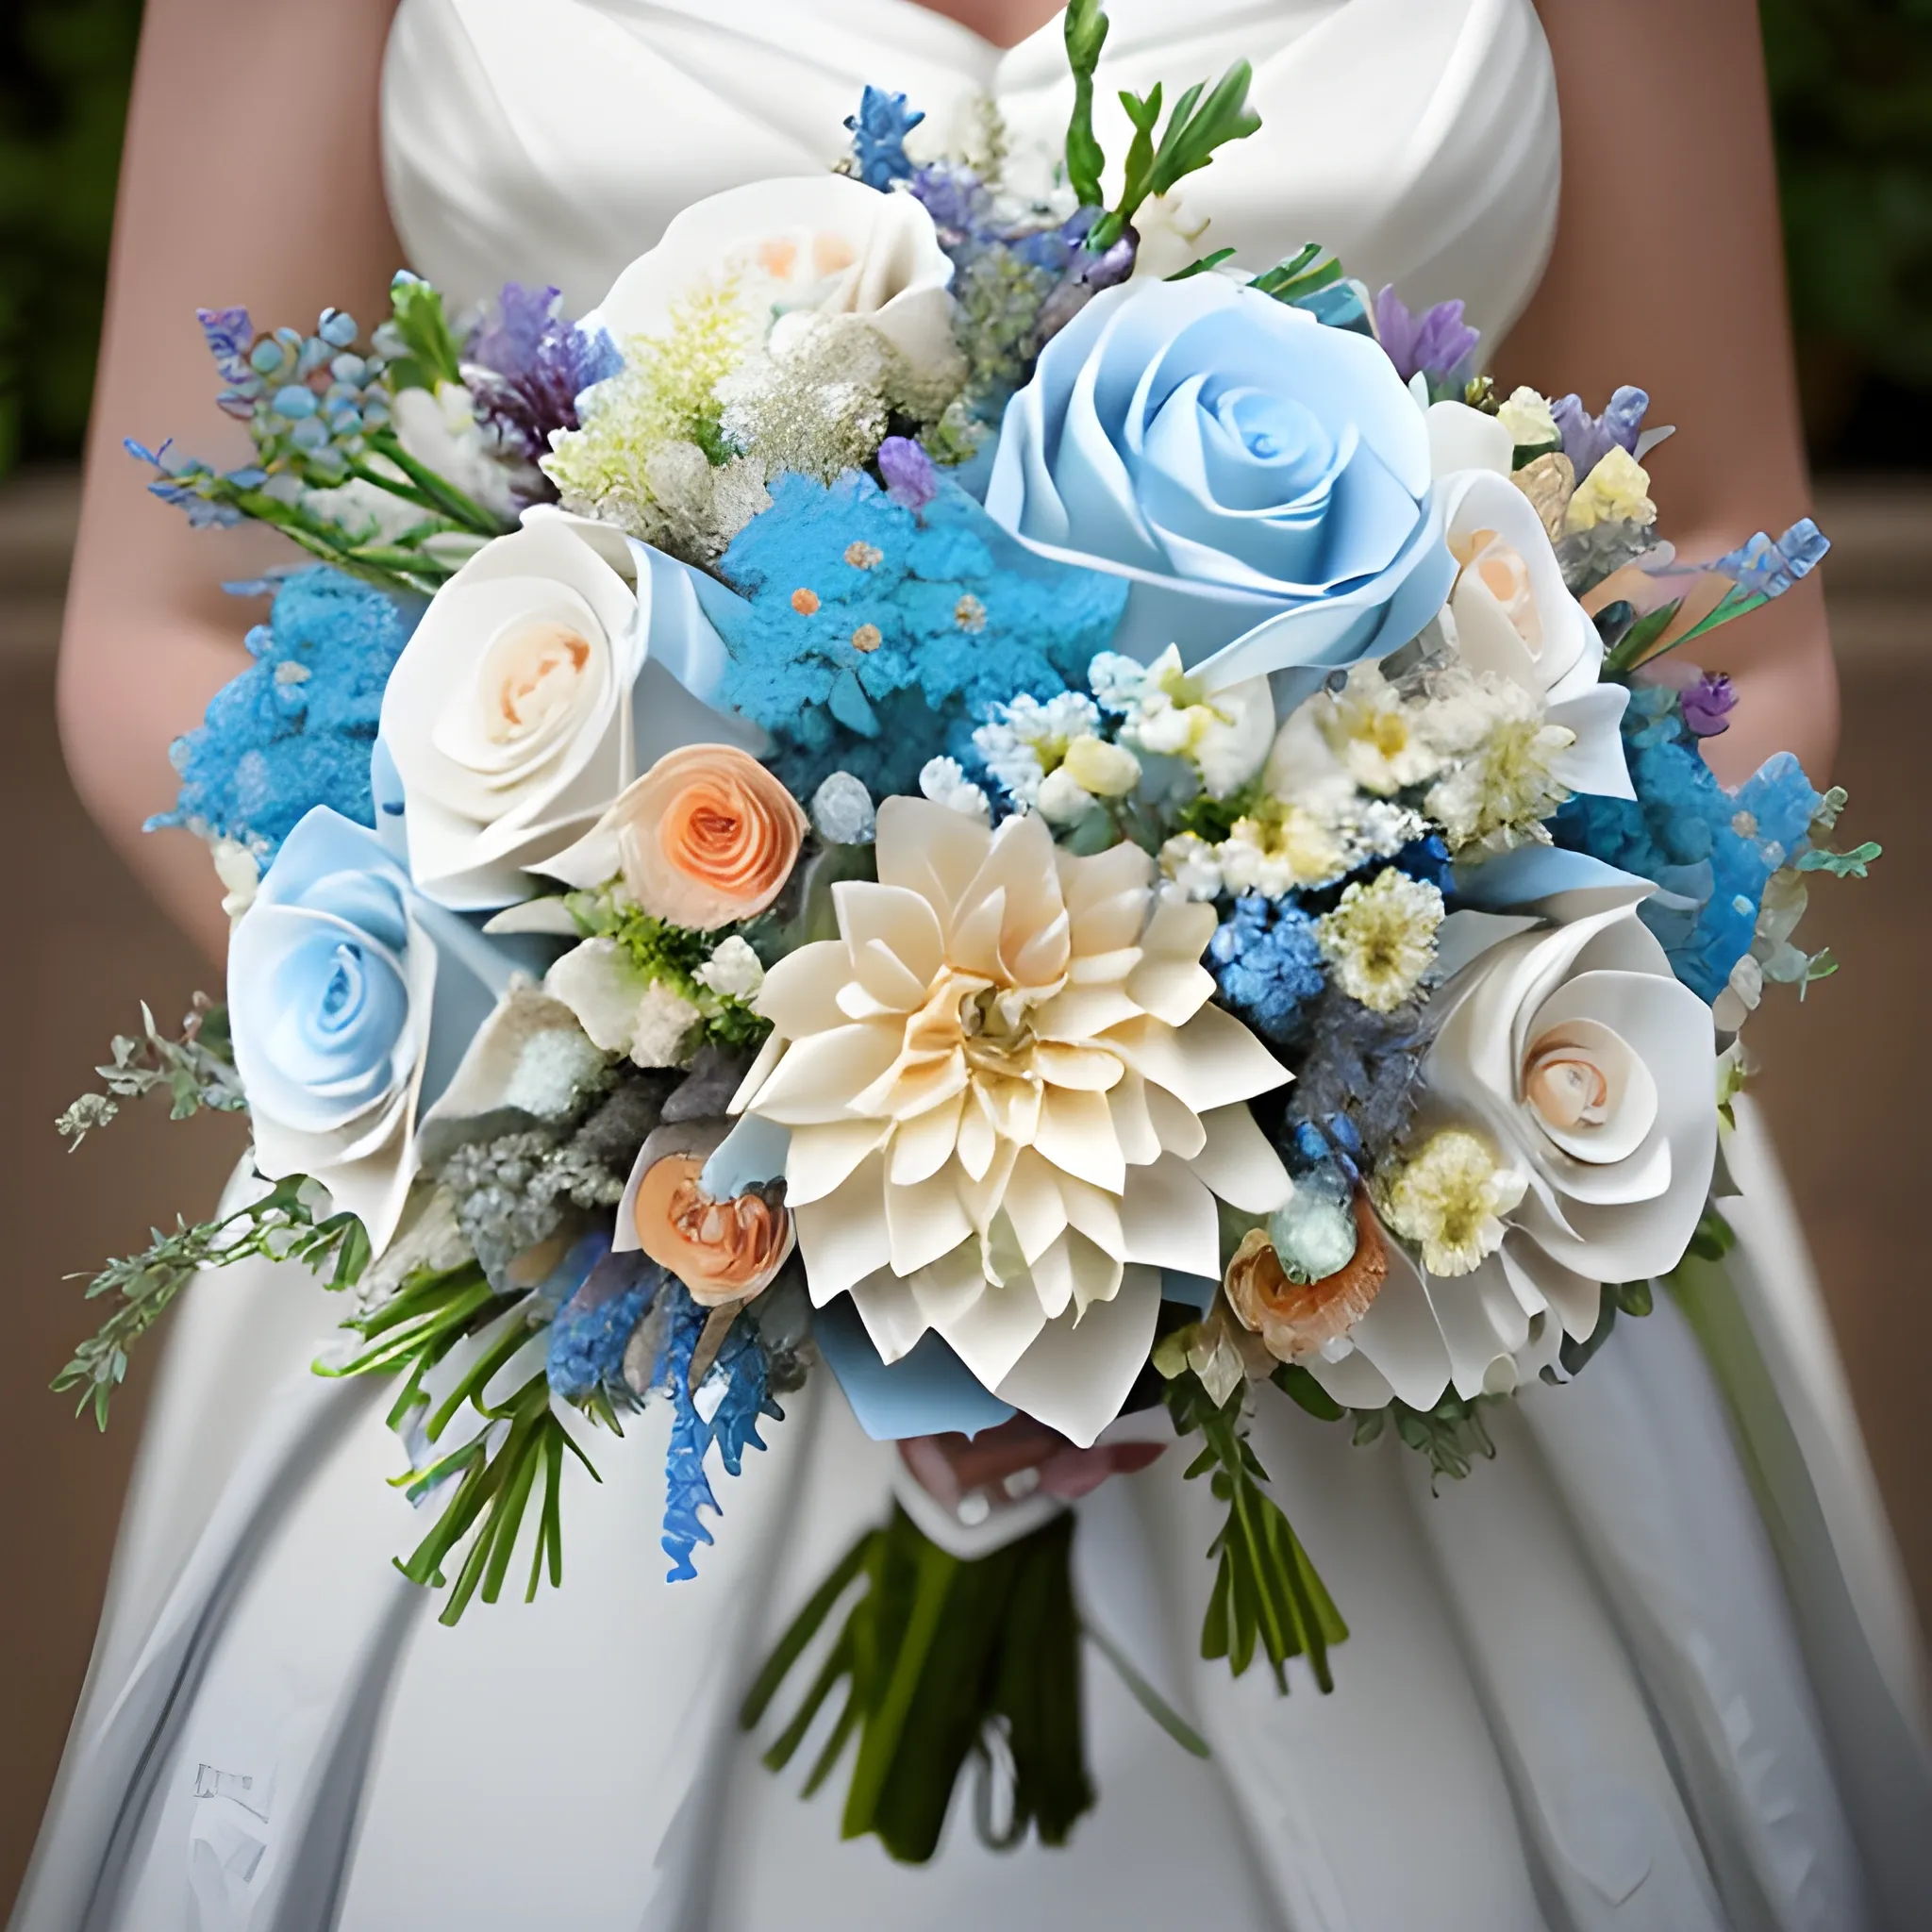 hyper realistic photo wedding bride's bouquet with dusty miller, terracotta roses, light blue delphinium, and ivory dahlias